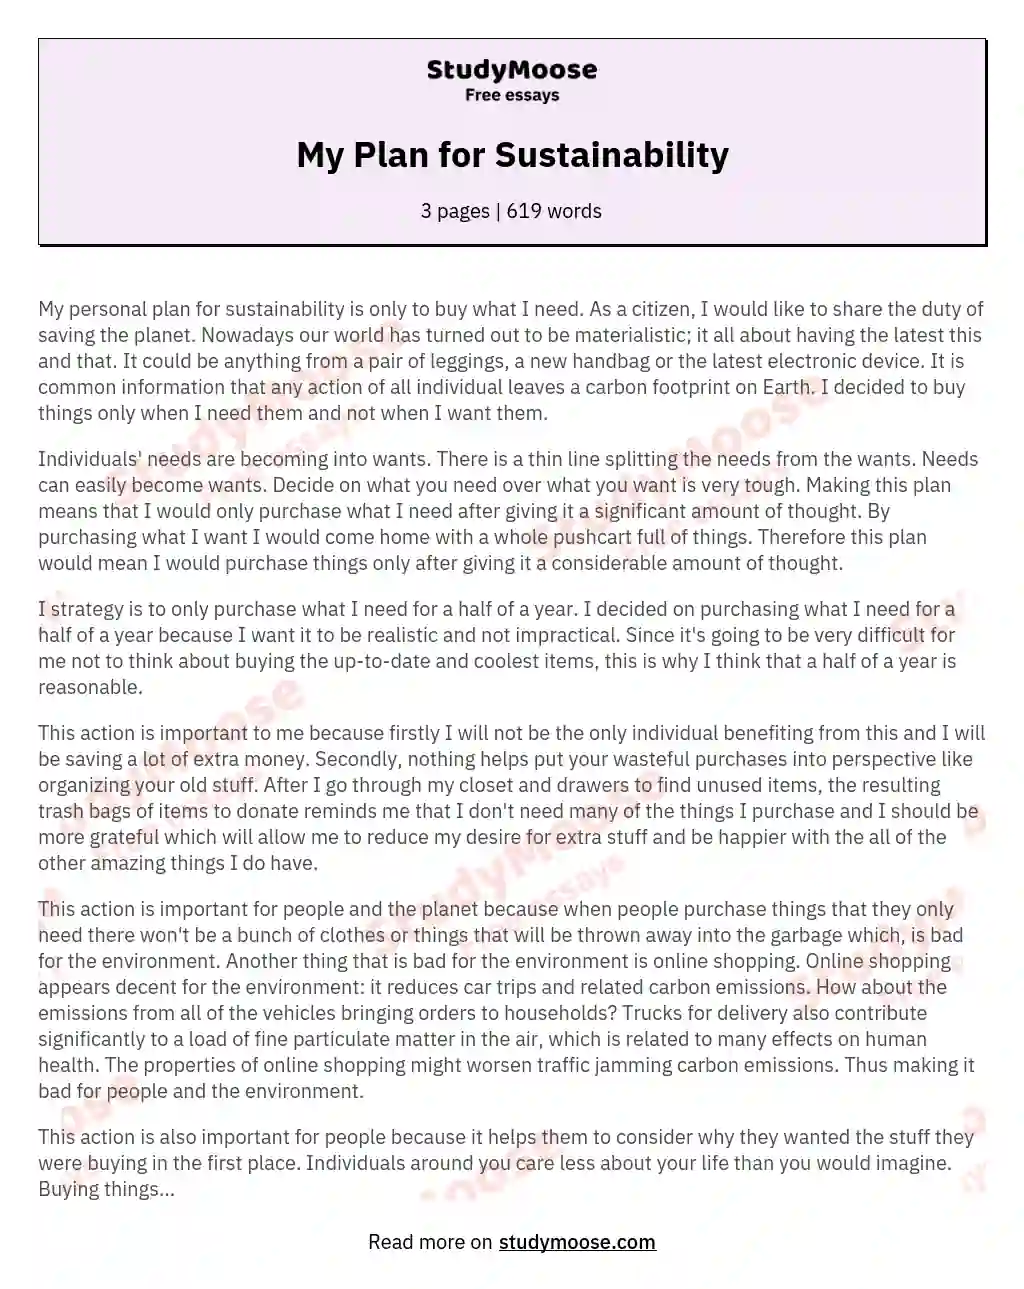 My Plan for Sustainability essay